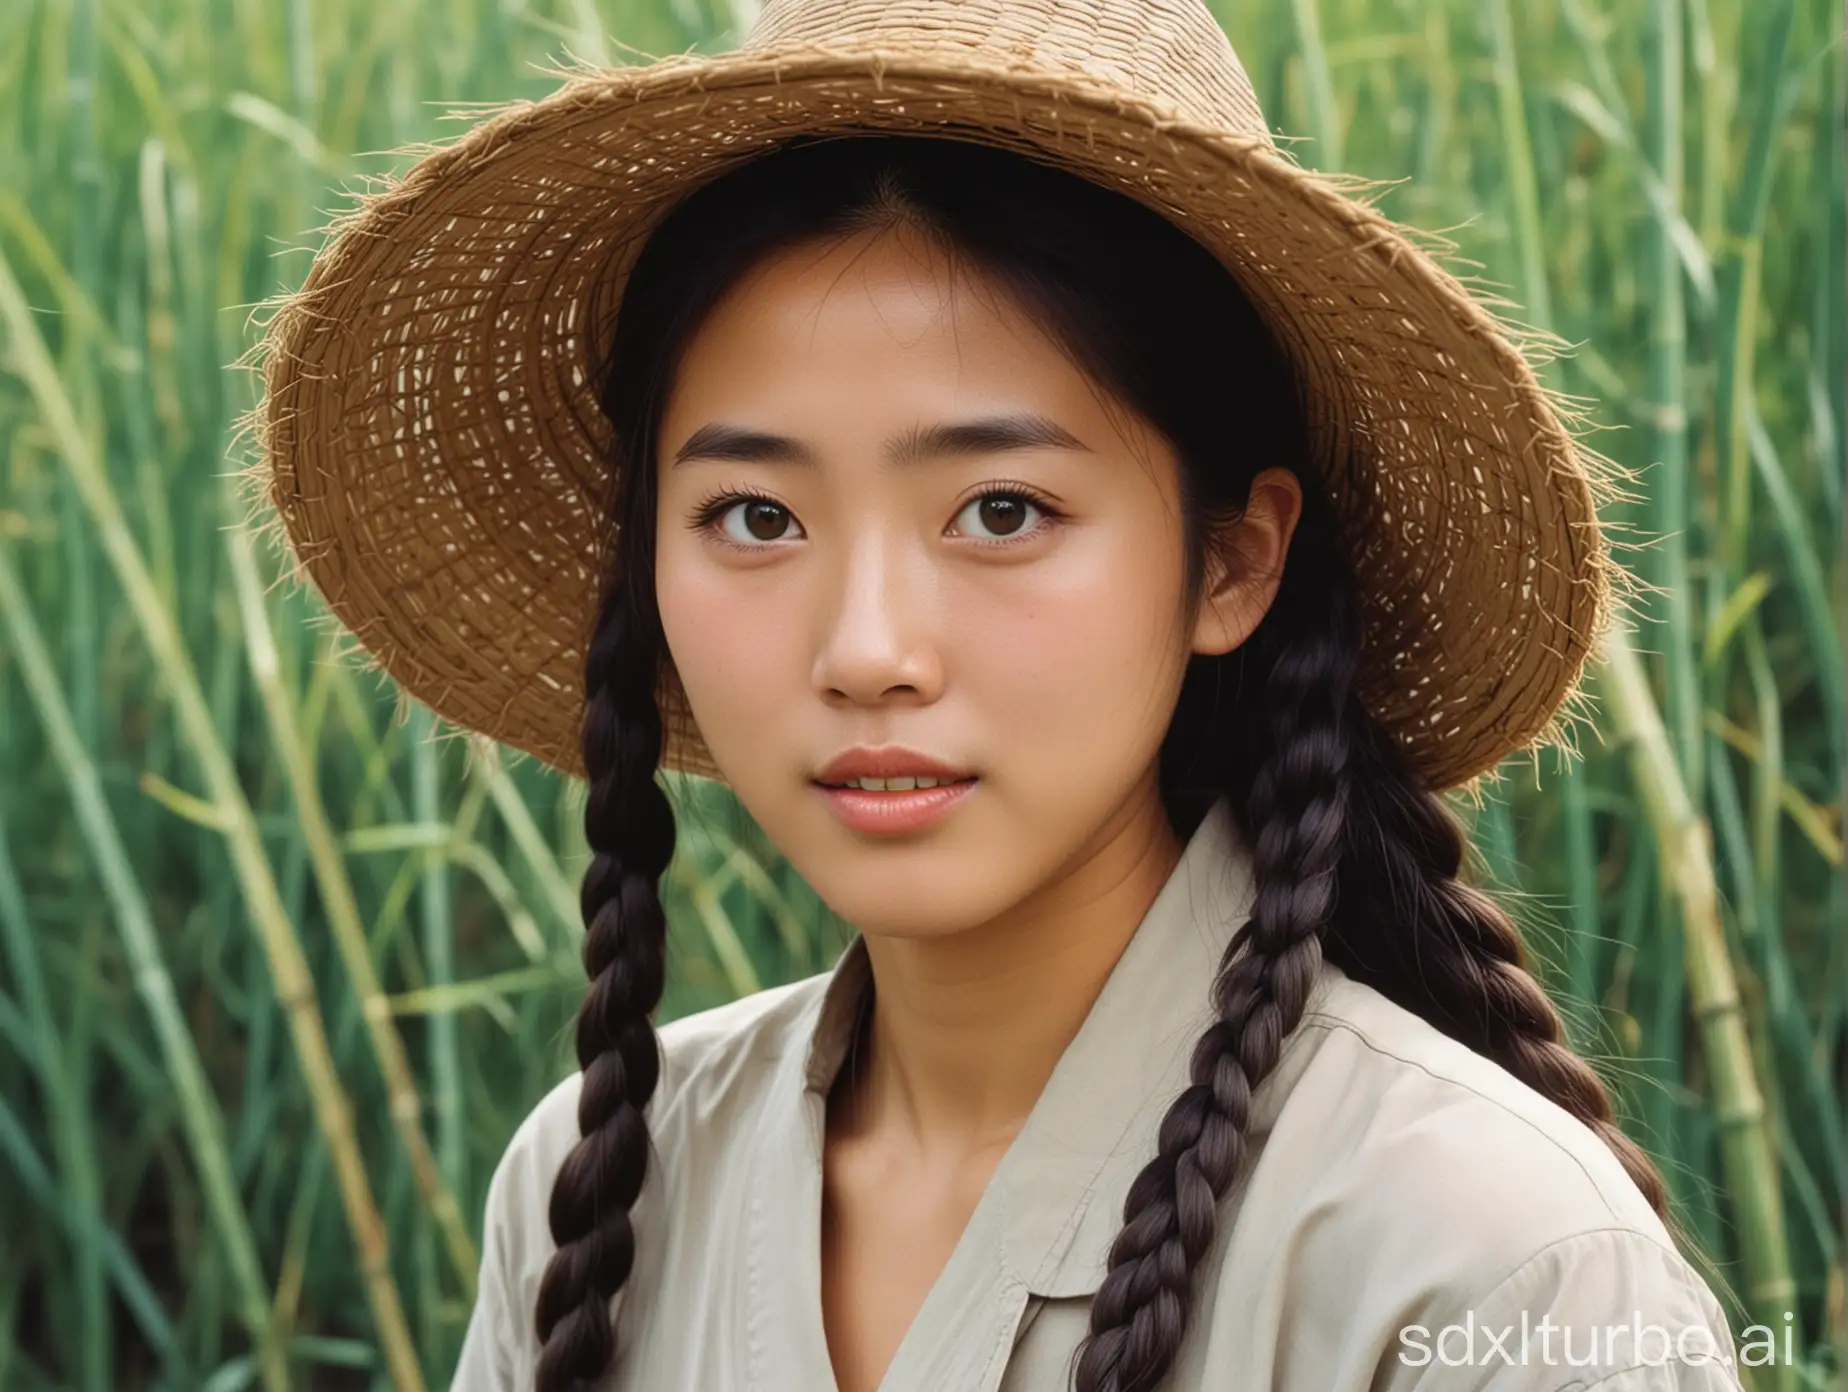 Chinese girl, 1990s, with thick and long braids, a rural girl, beautiful big eyes, wearing a bamboo hat, working in the fields